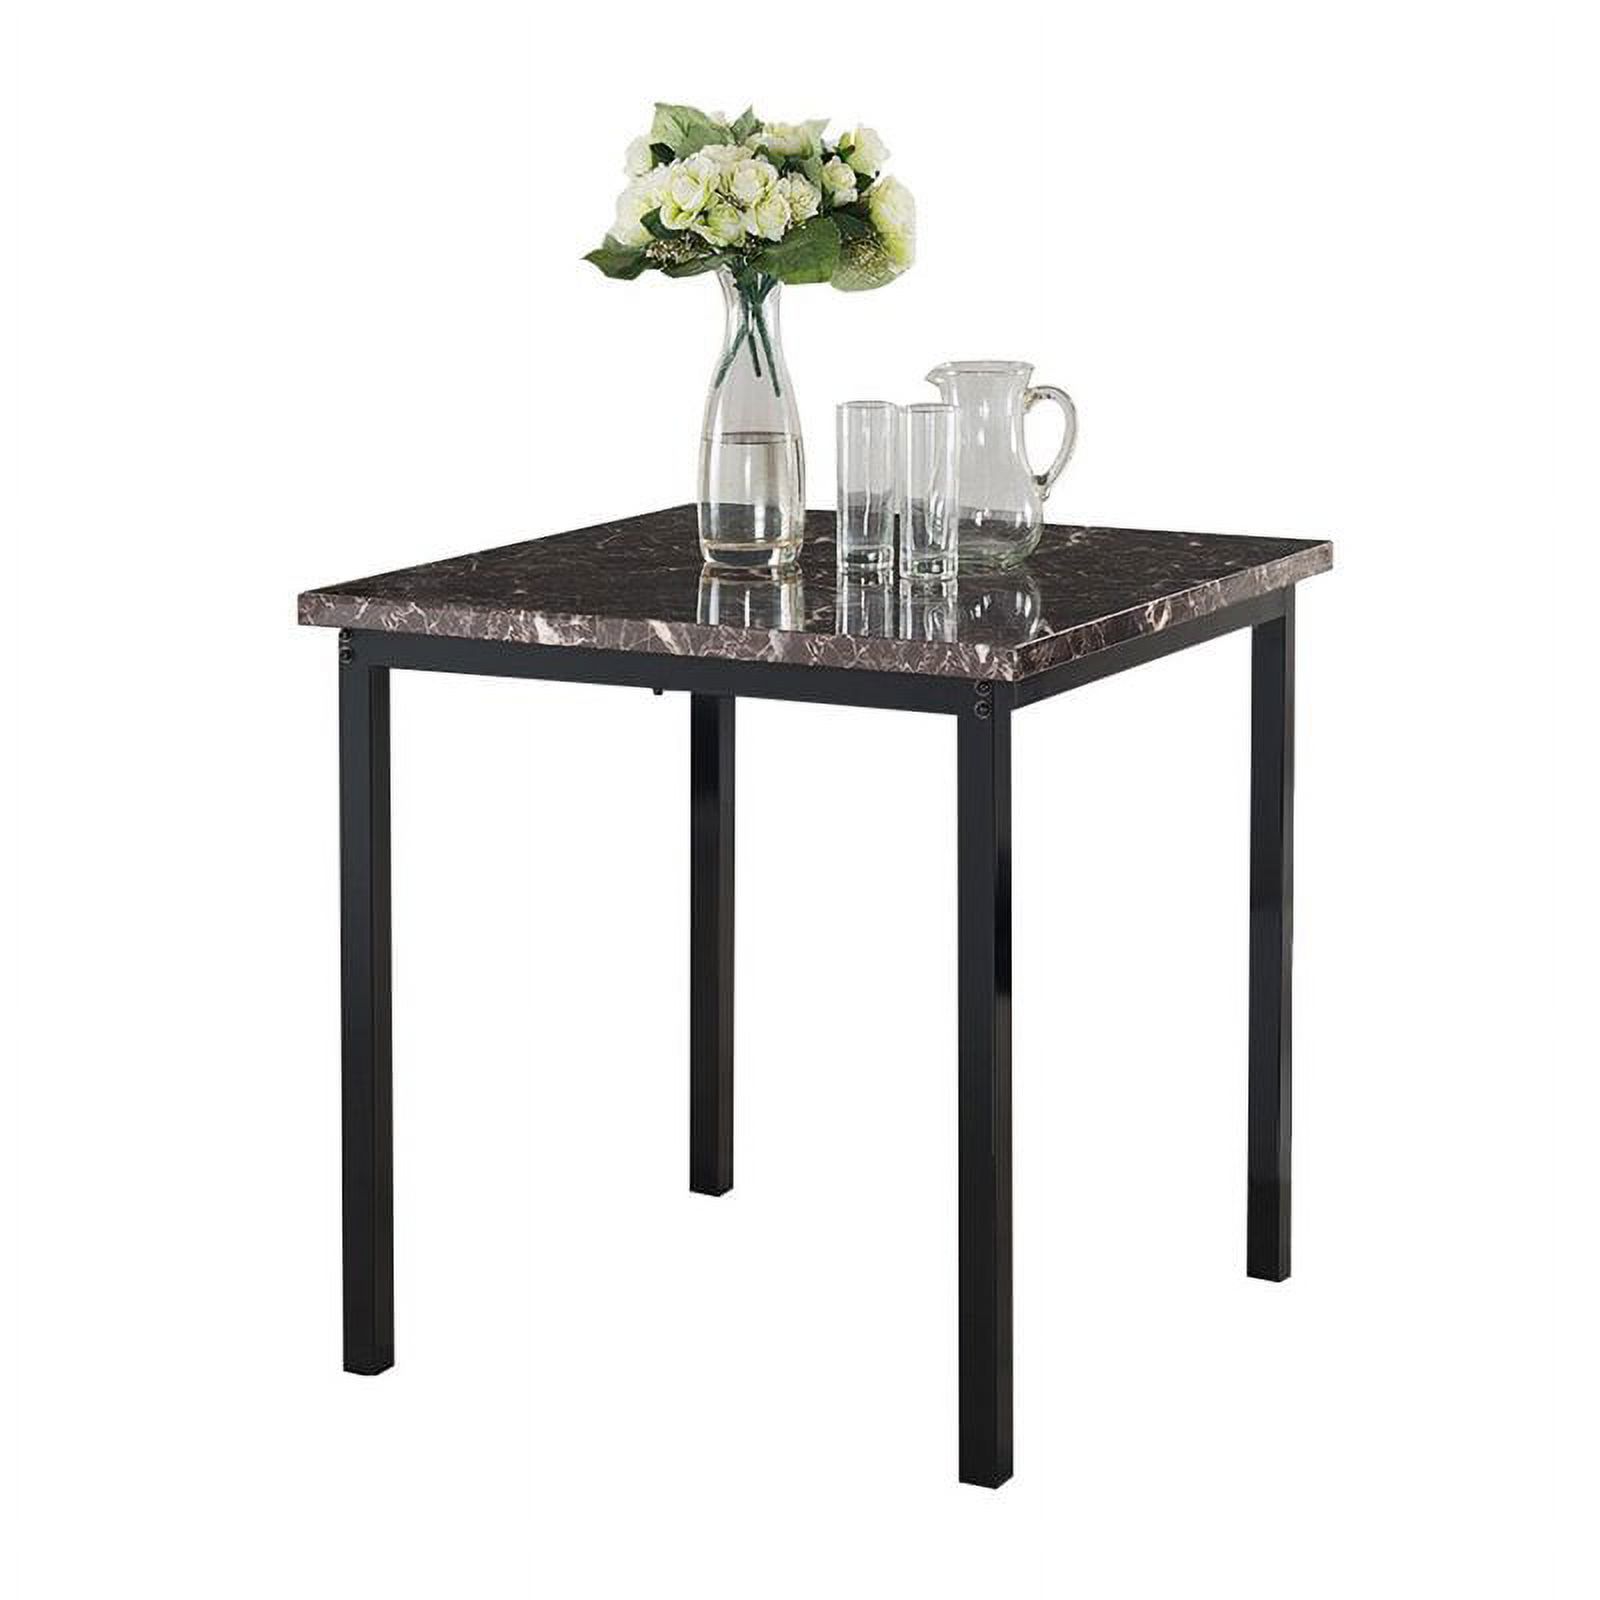 KB D107-4 30 x 30 x 30 in. Dining Table, Black & Marble - image 2 of 3